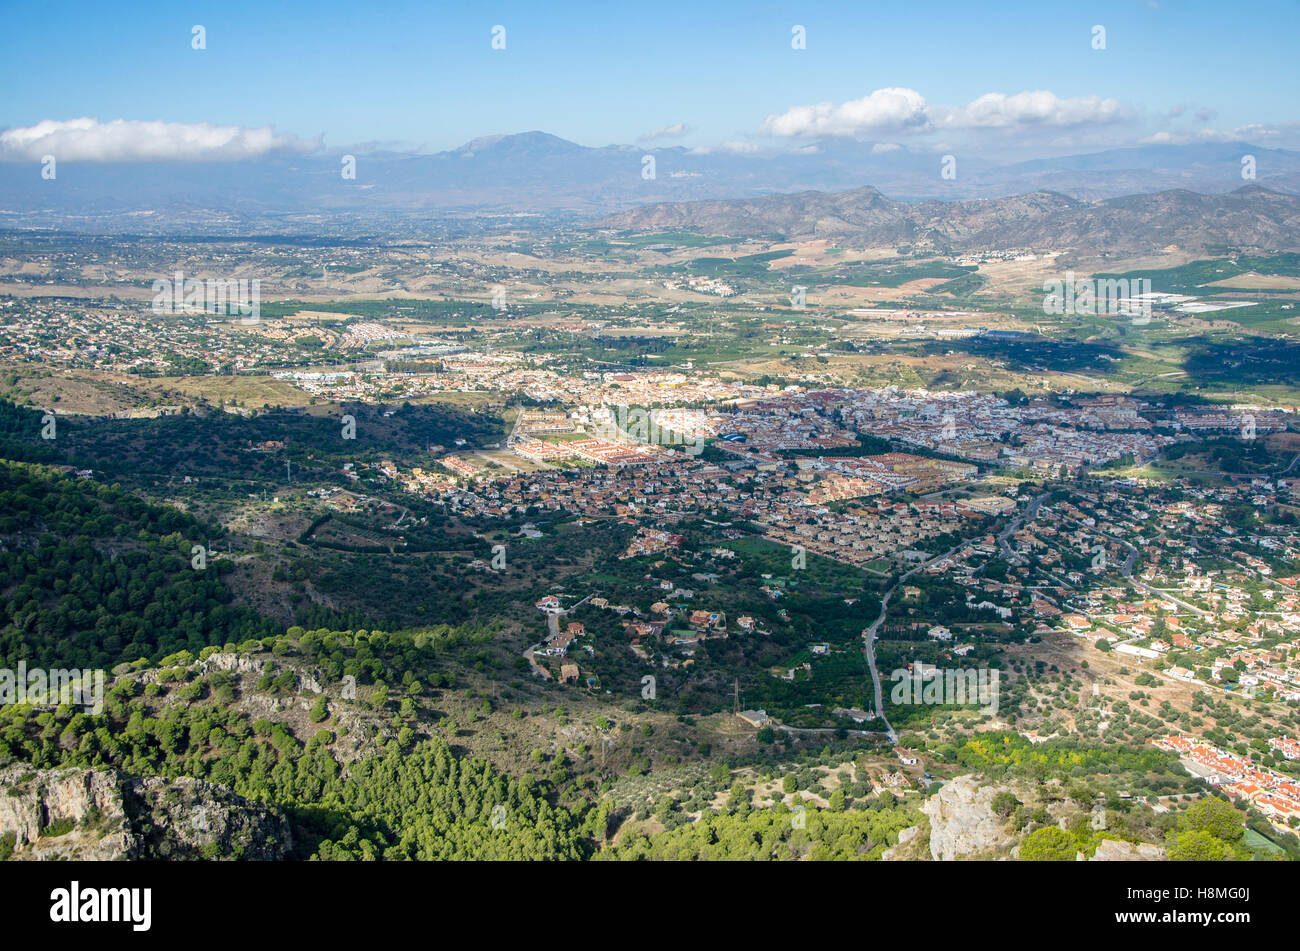 Aerial view of Alhaurin de la Torre, village, town in Southern Spain. Stock Photo